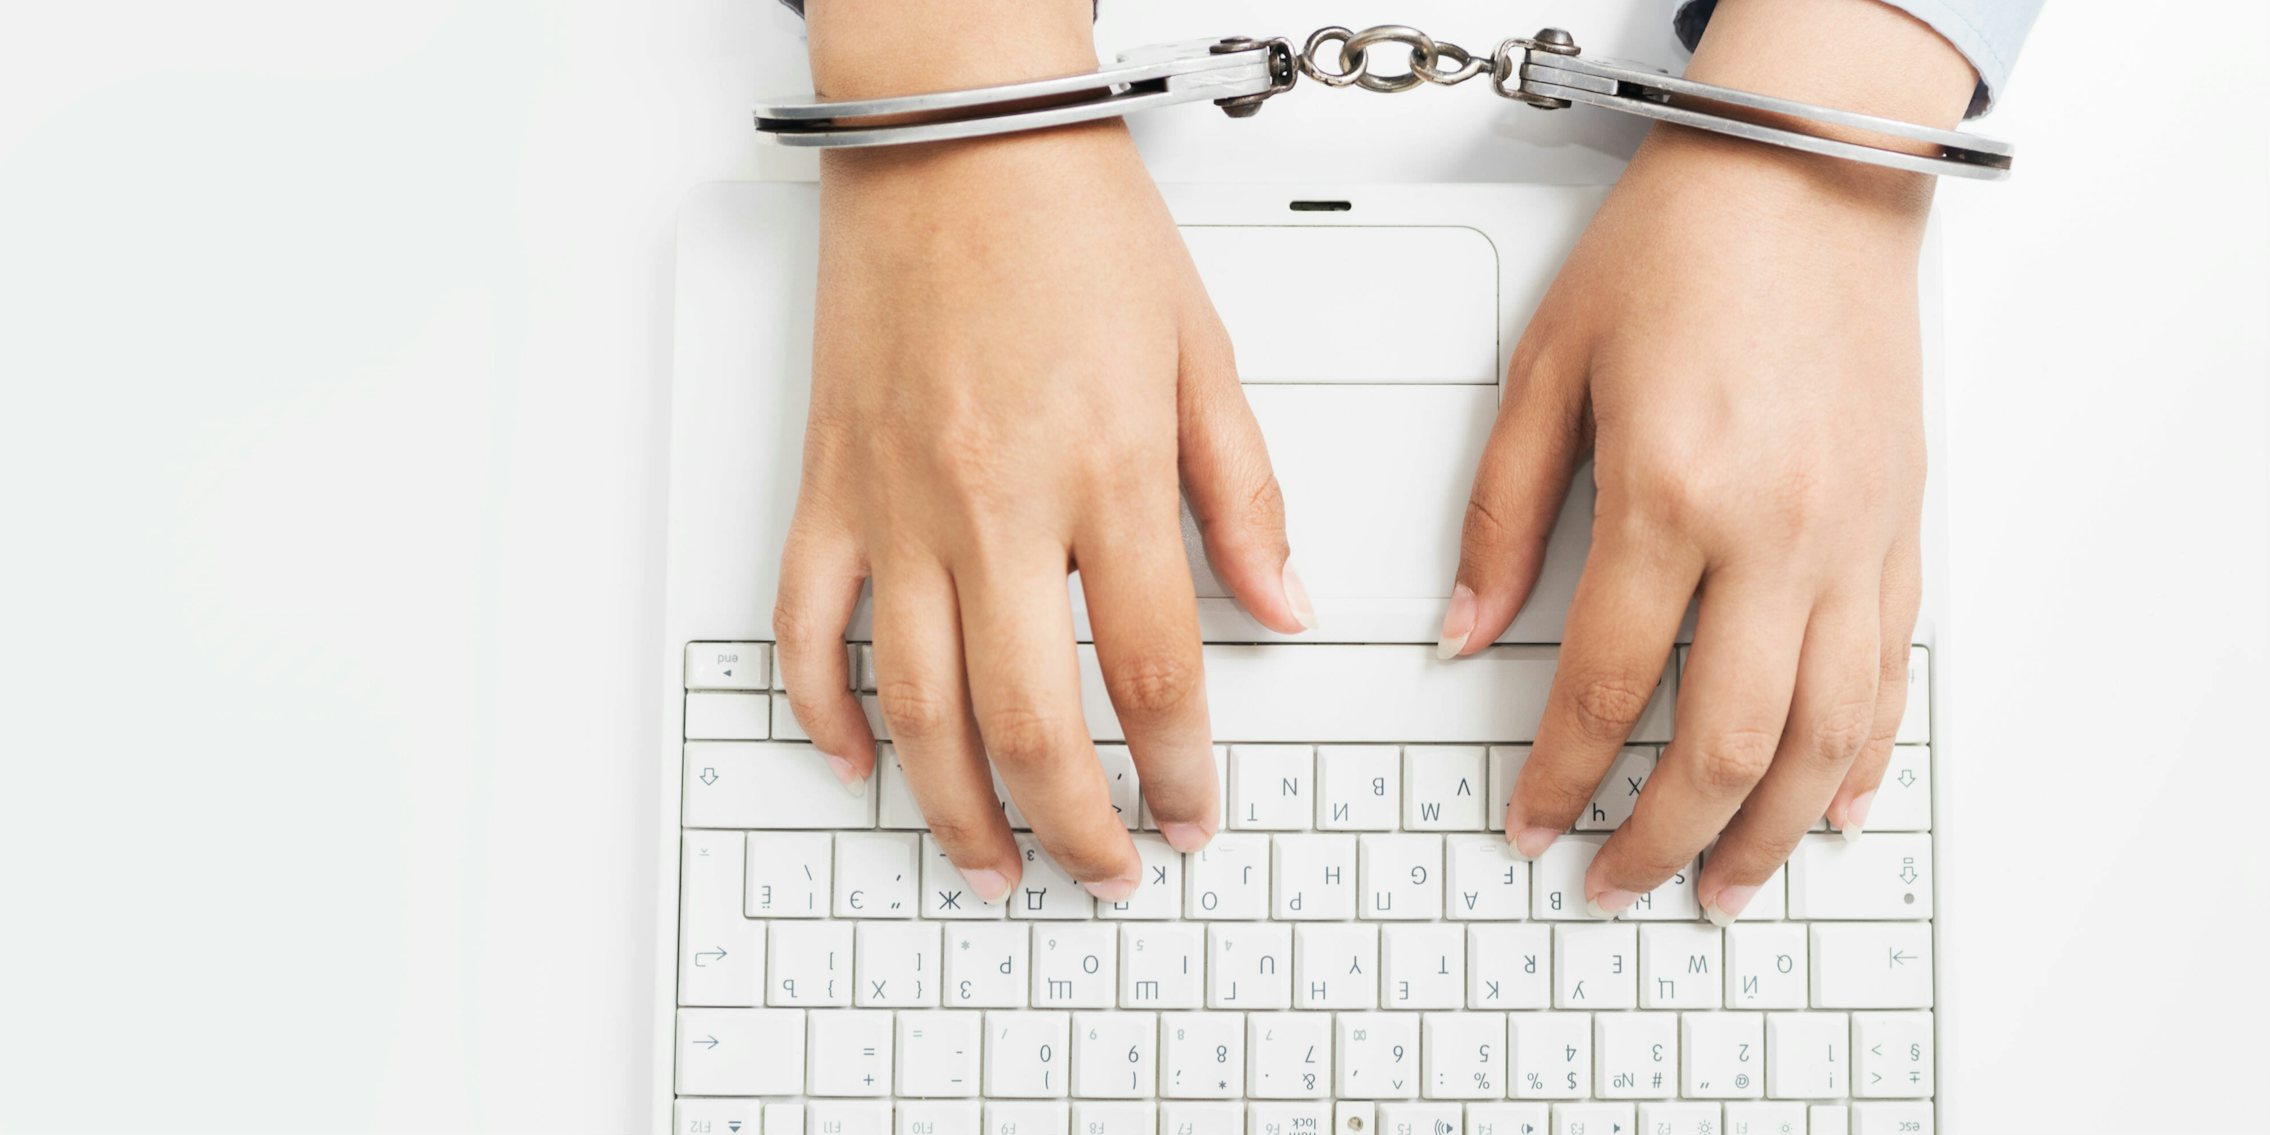 internet censorship typing on computer while handcuffed